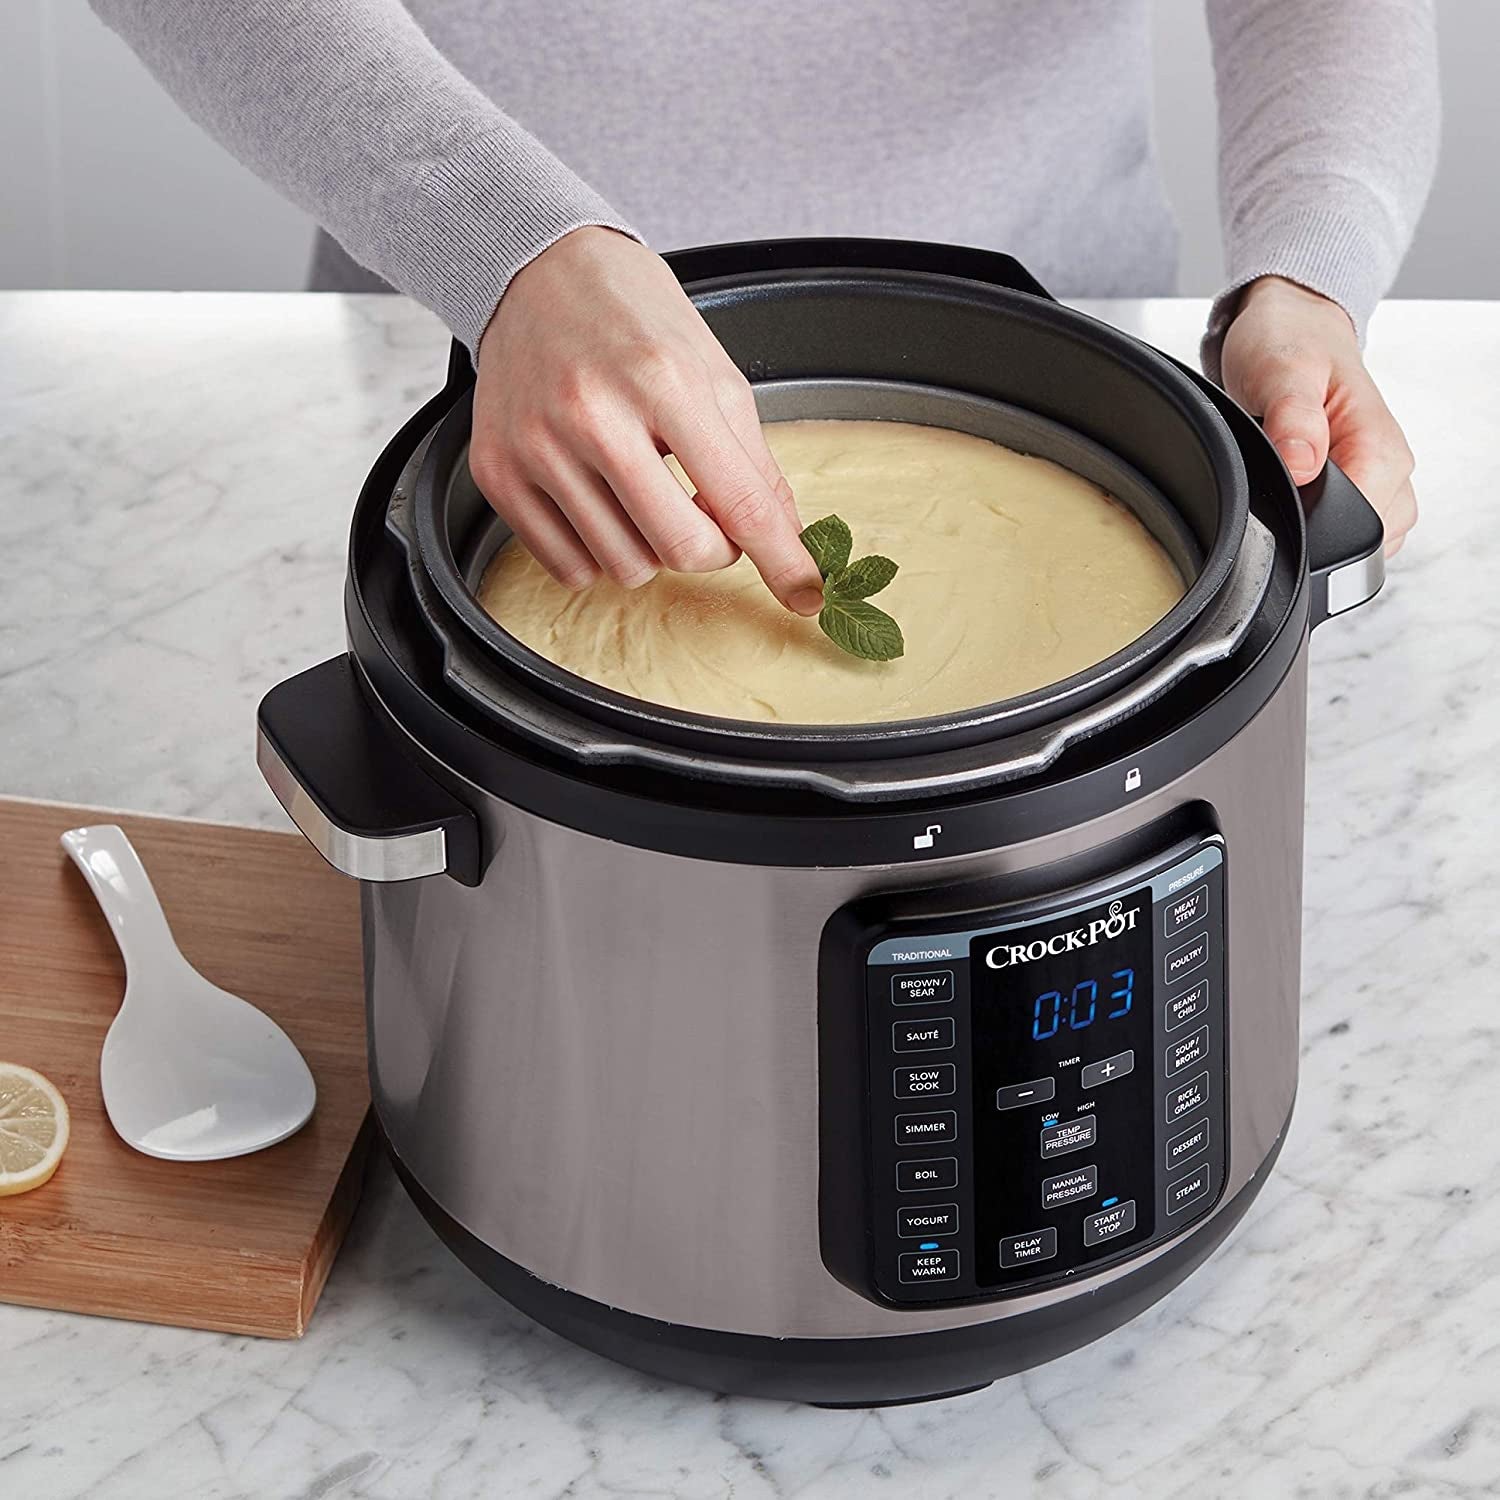 Crockpot Multi-Cooker, Programmable with Slow Cooker, Saute